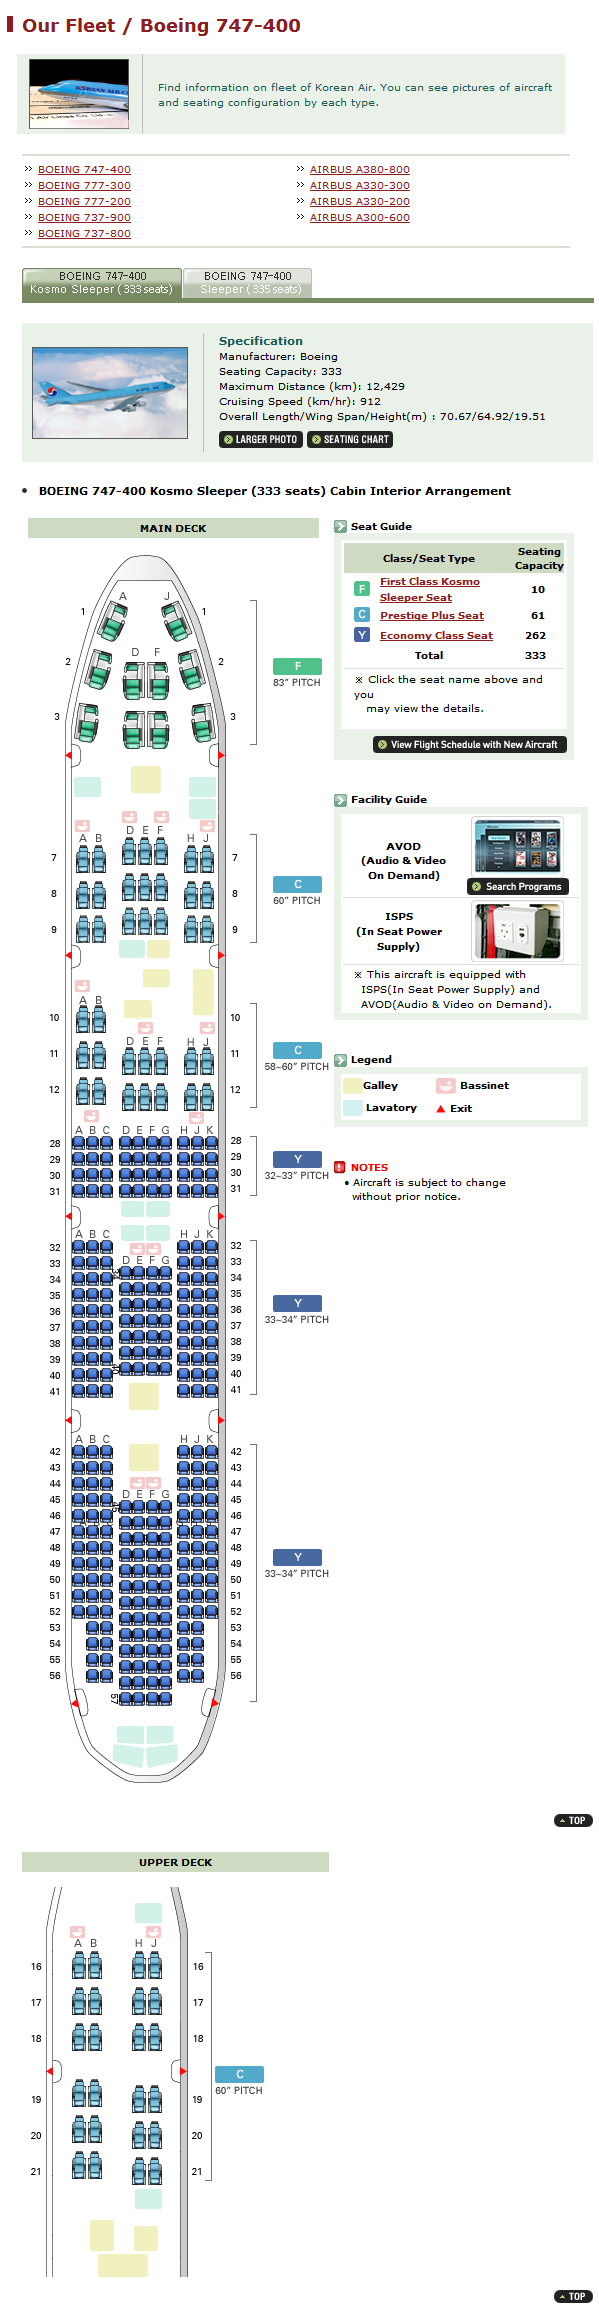 KOREAN AIR AIRLINES BOEING 747-400 AIRCRAFT SEATING CHART